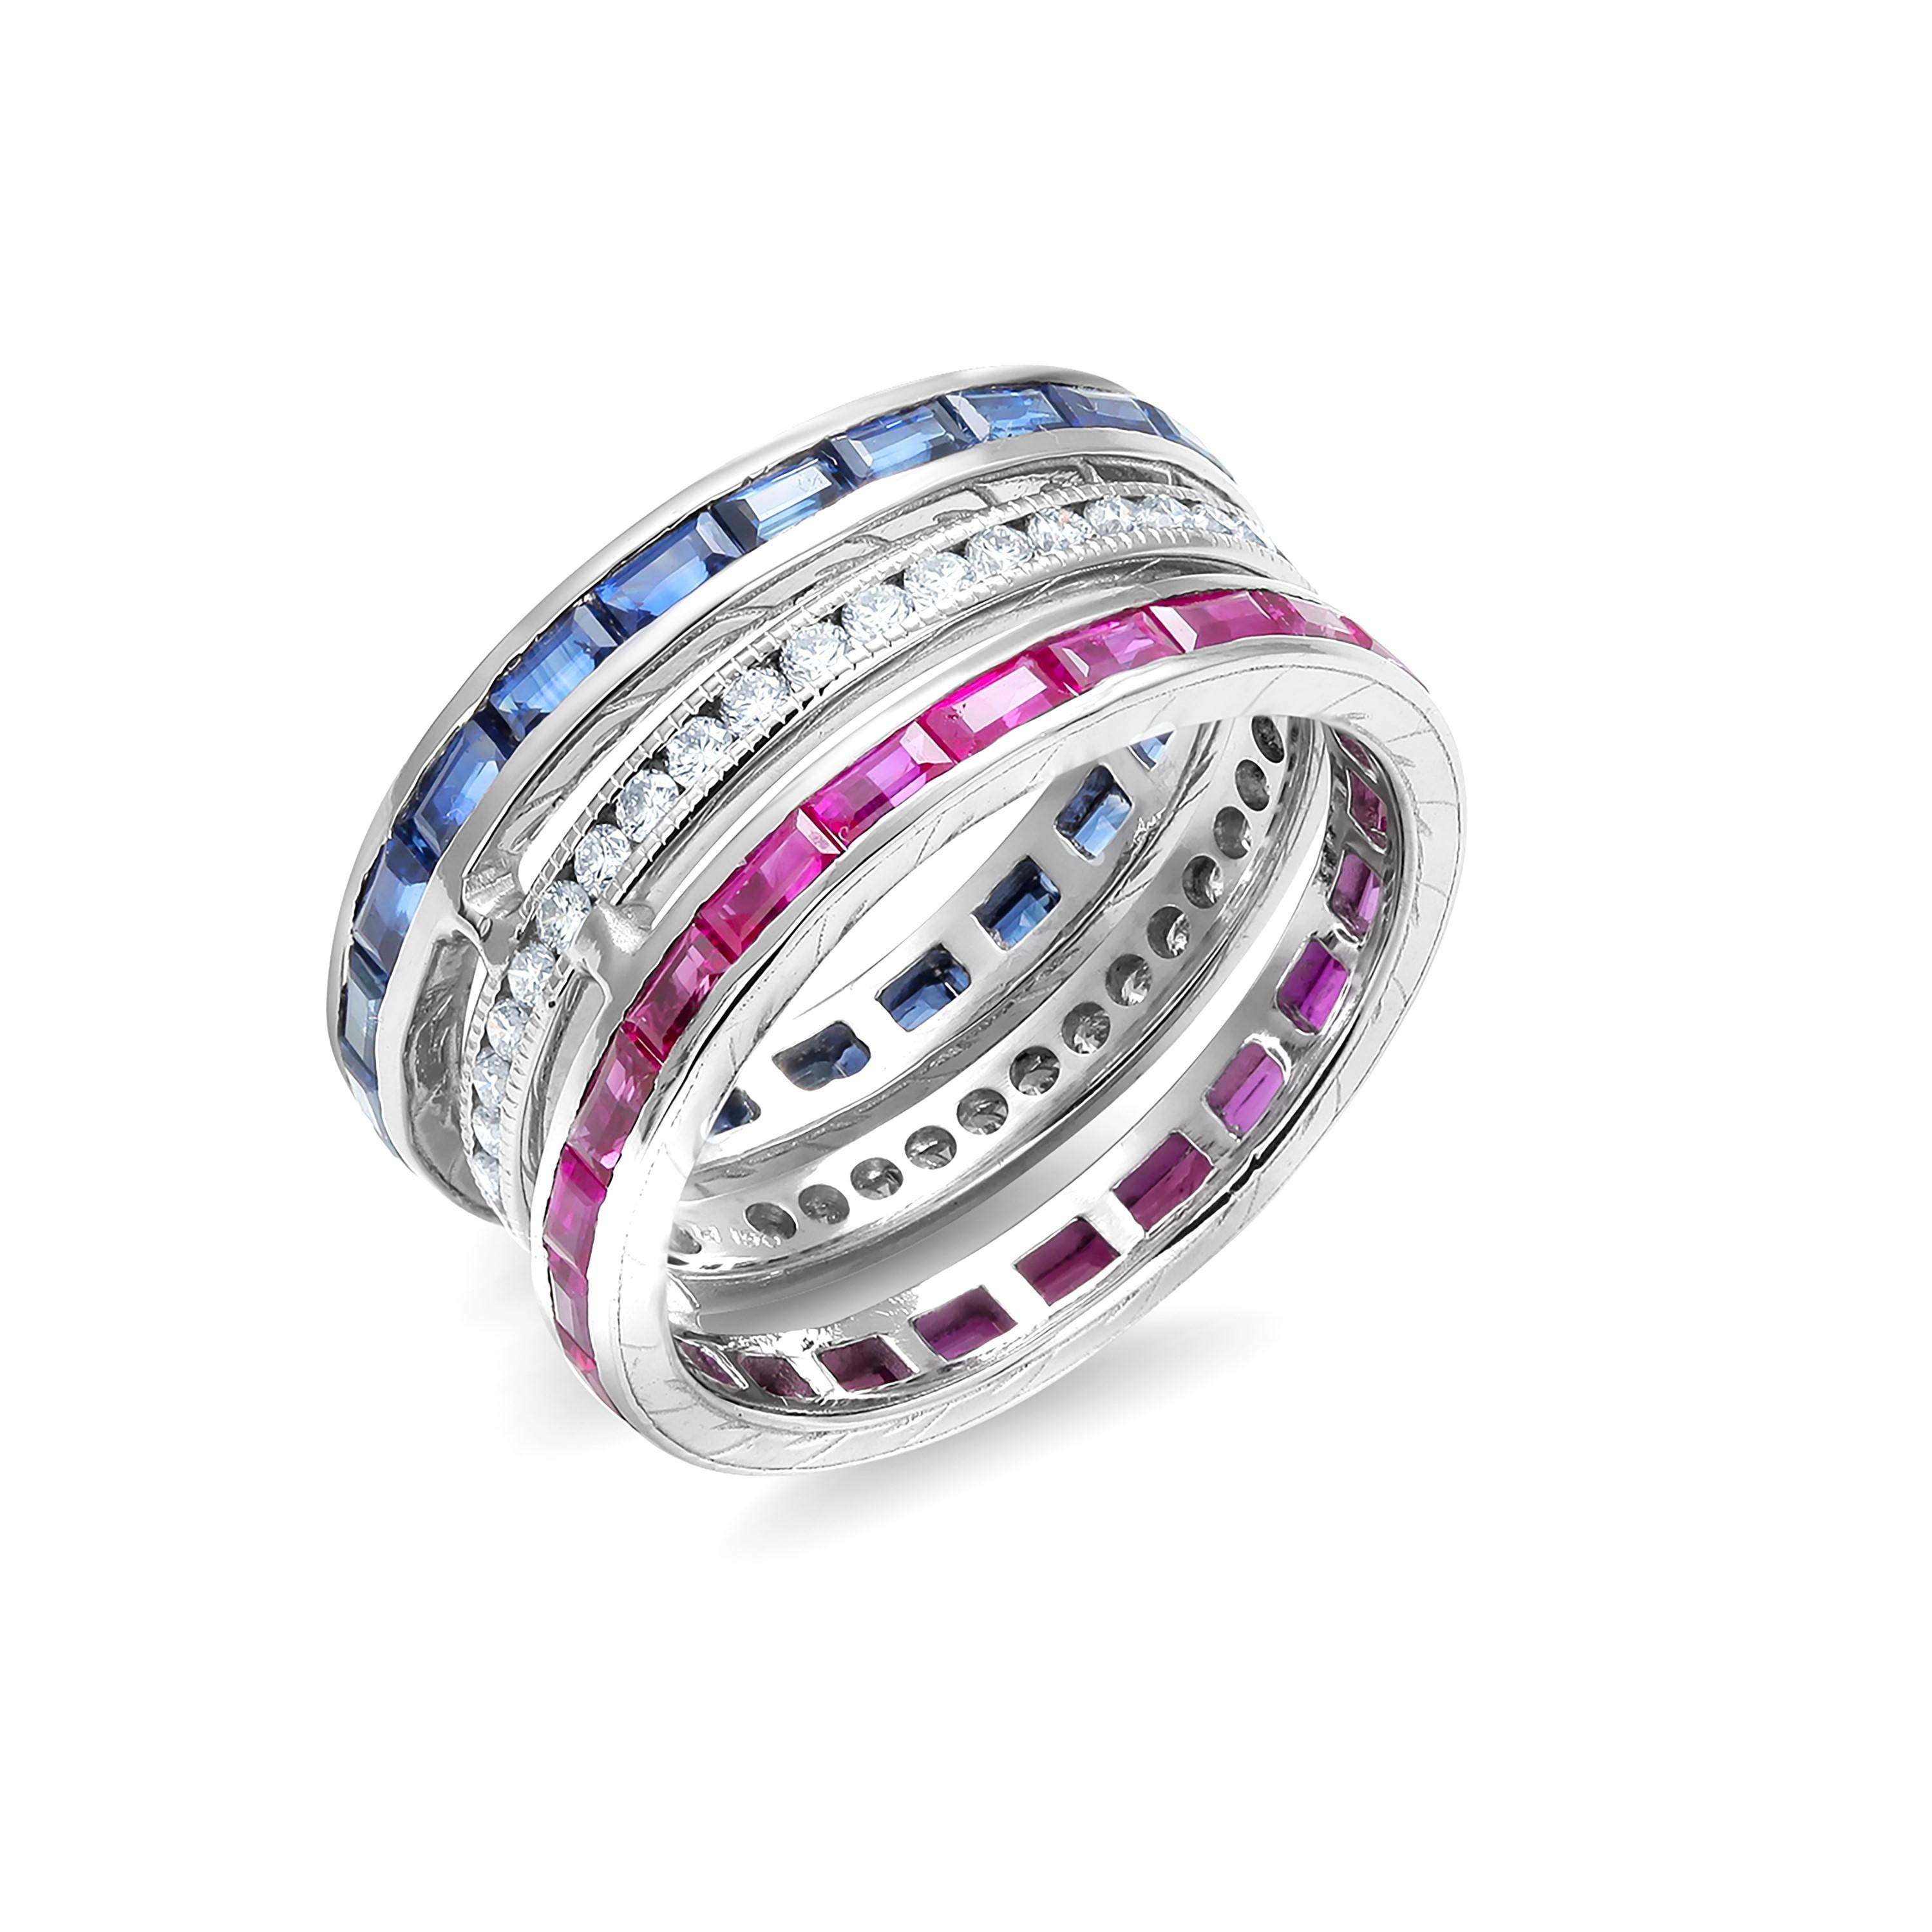 Triple Stacking Bands Ruby Diamond Sapphire 3.80 Carat 9.4 Millimeter Wide Ring 1